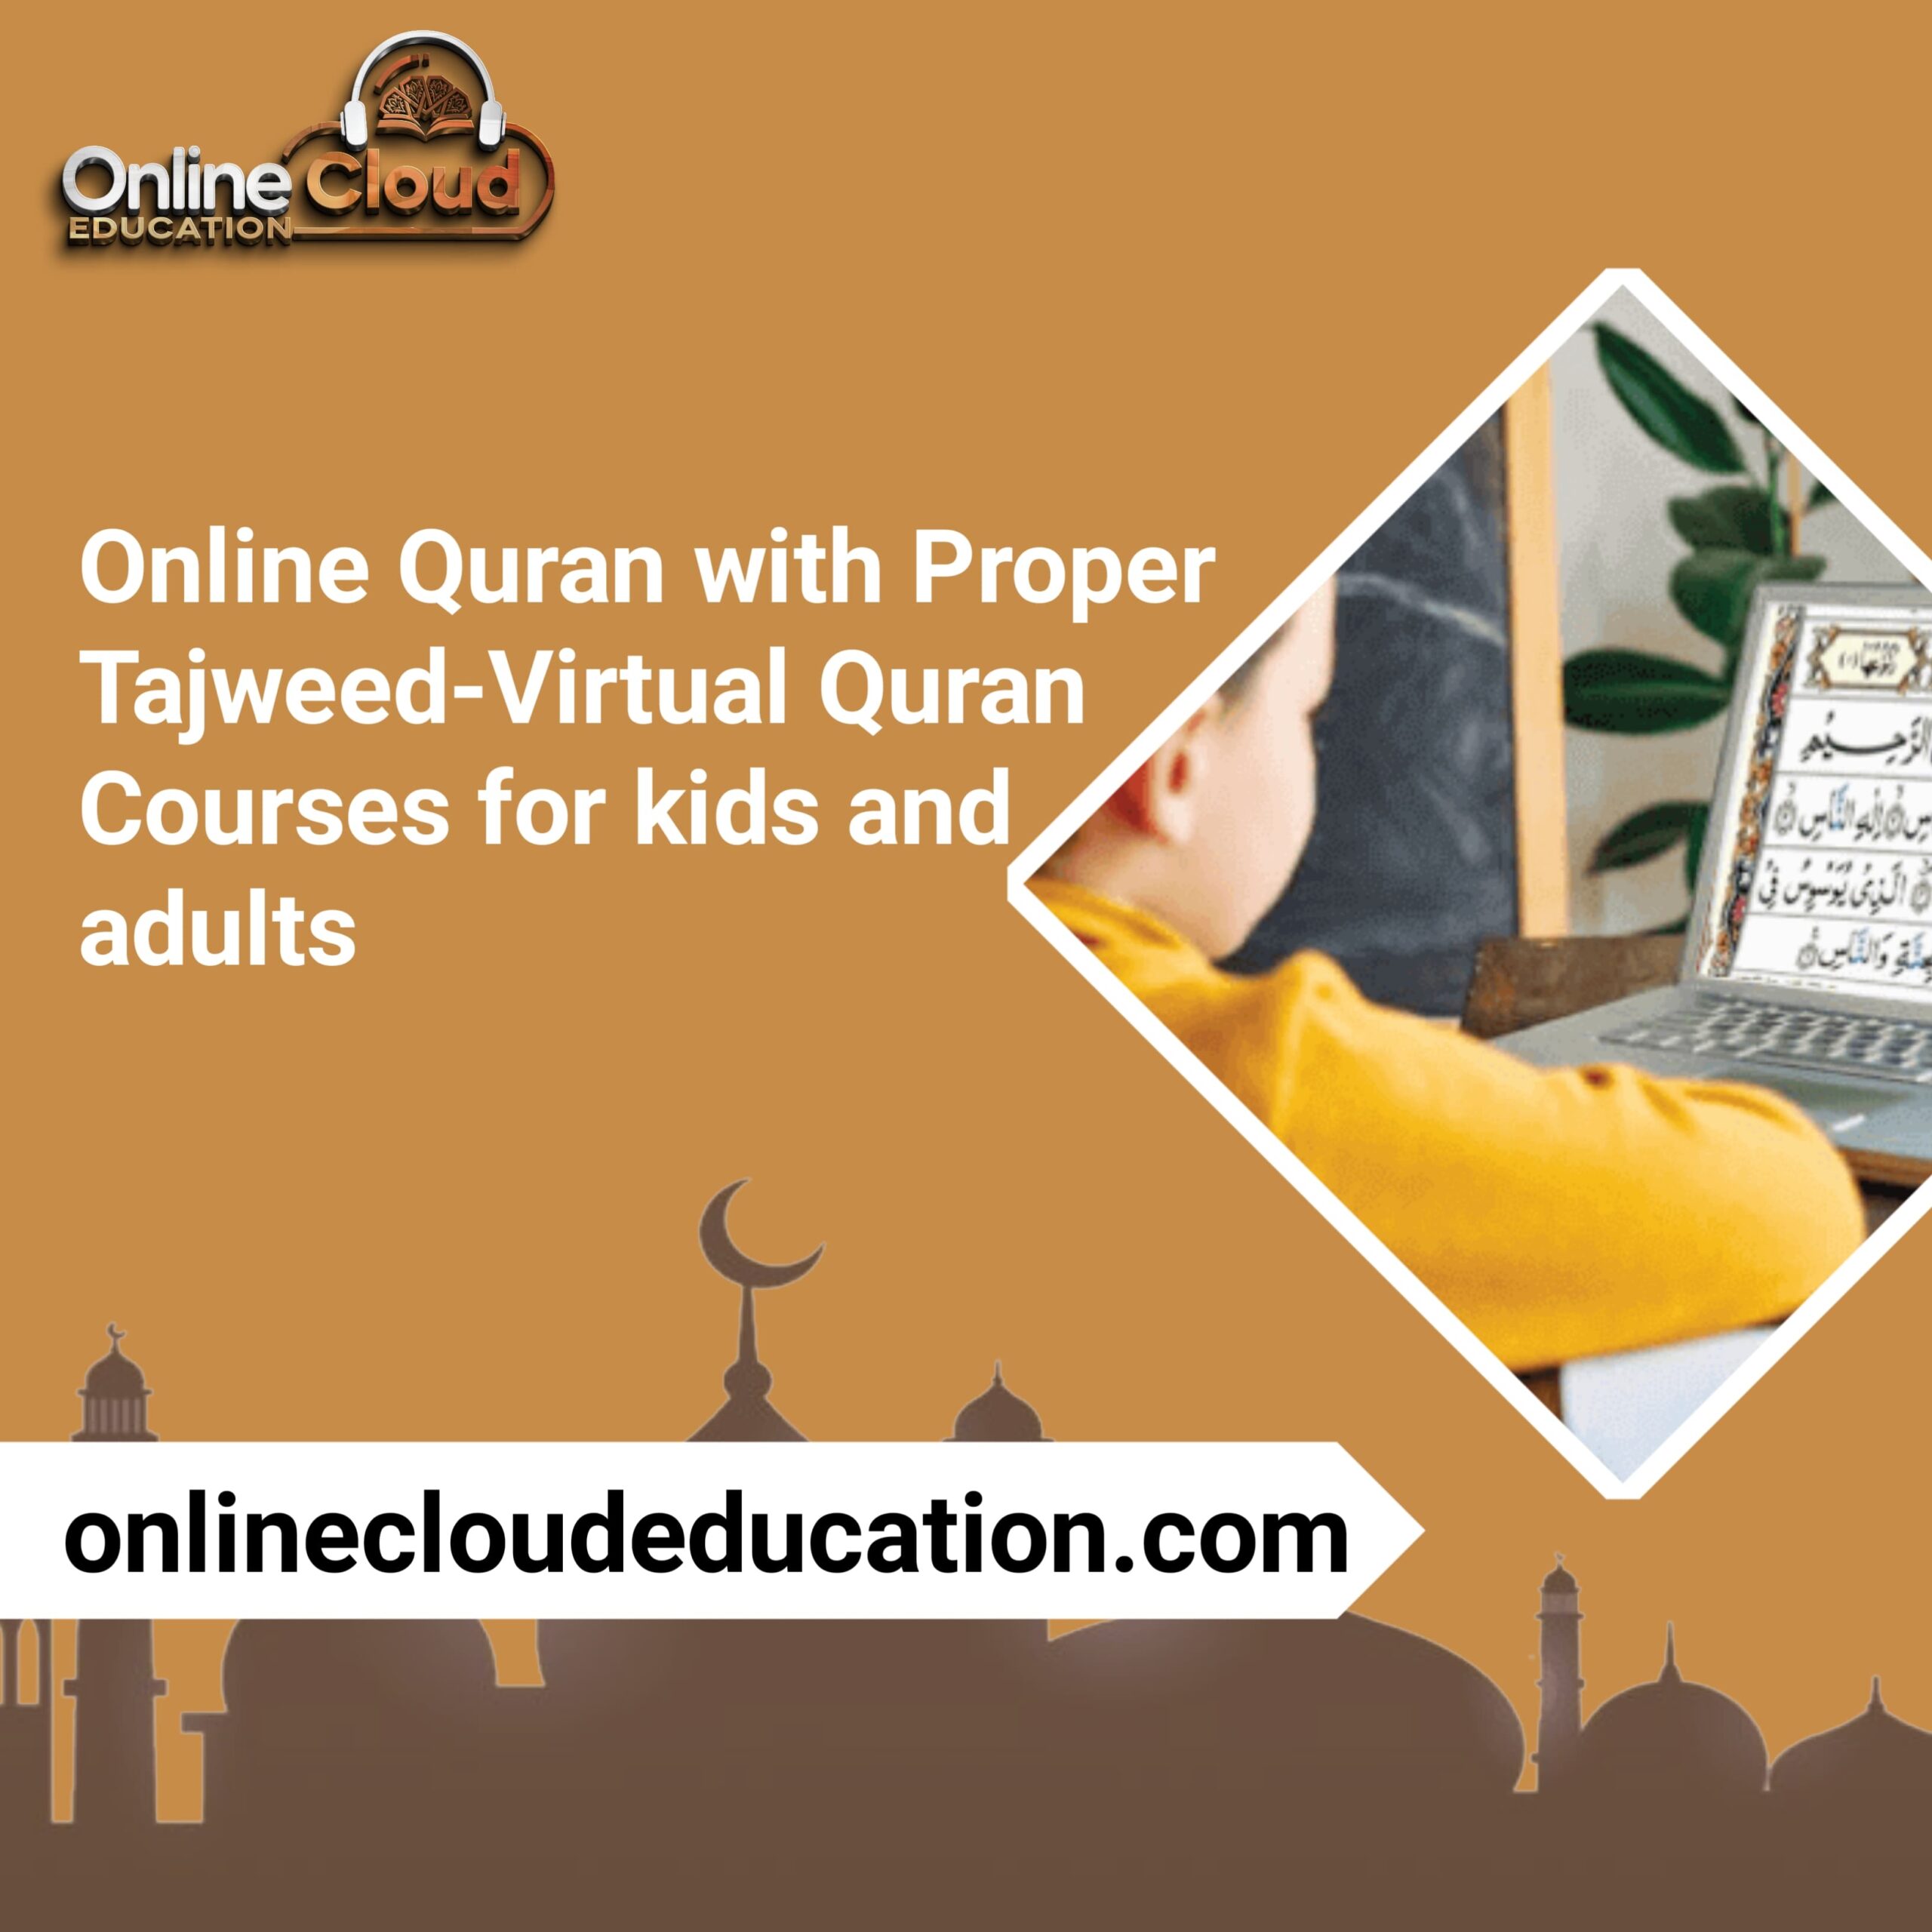 Online Quran for kids and adults